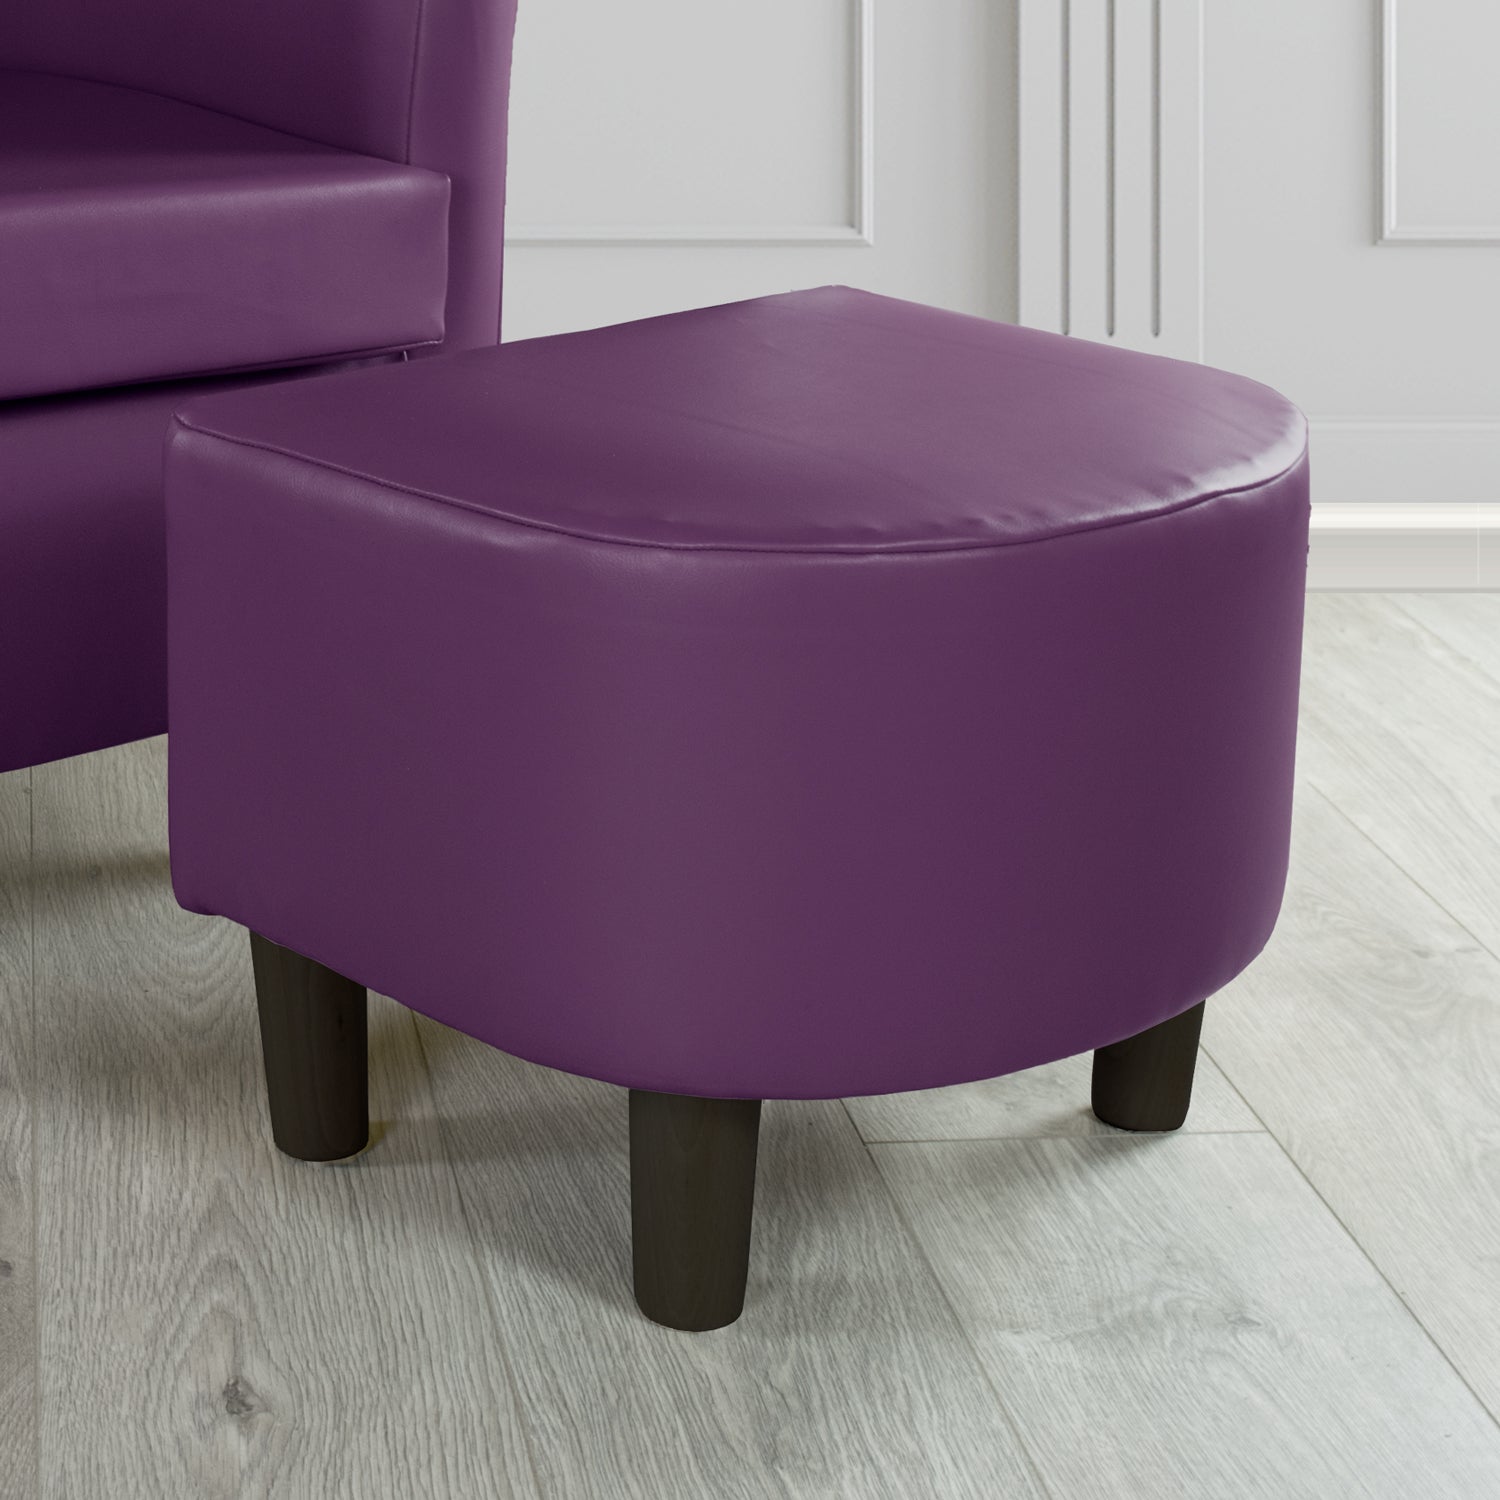 Tuscany Just Colour Damson Faux Leather Footstool (4601148407850)